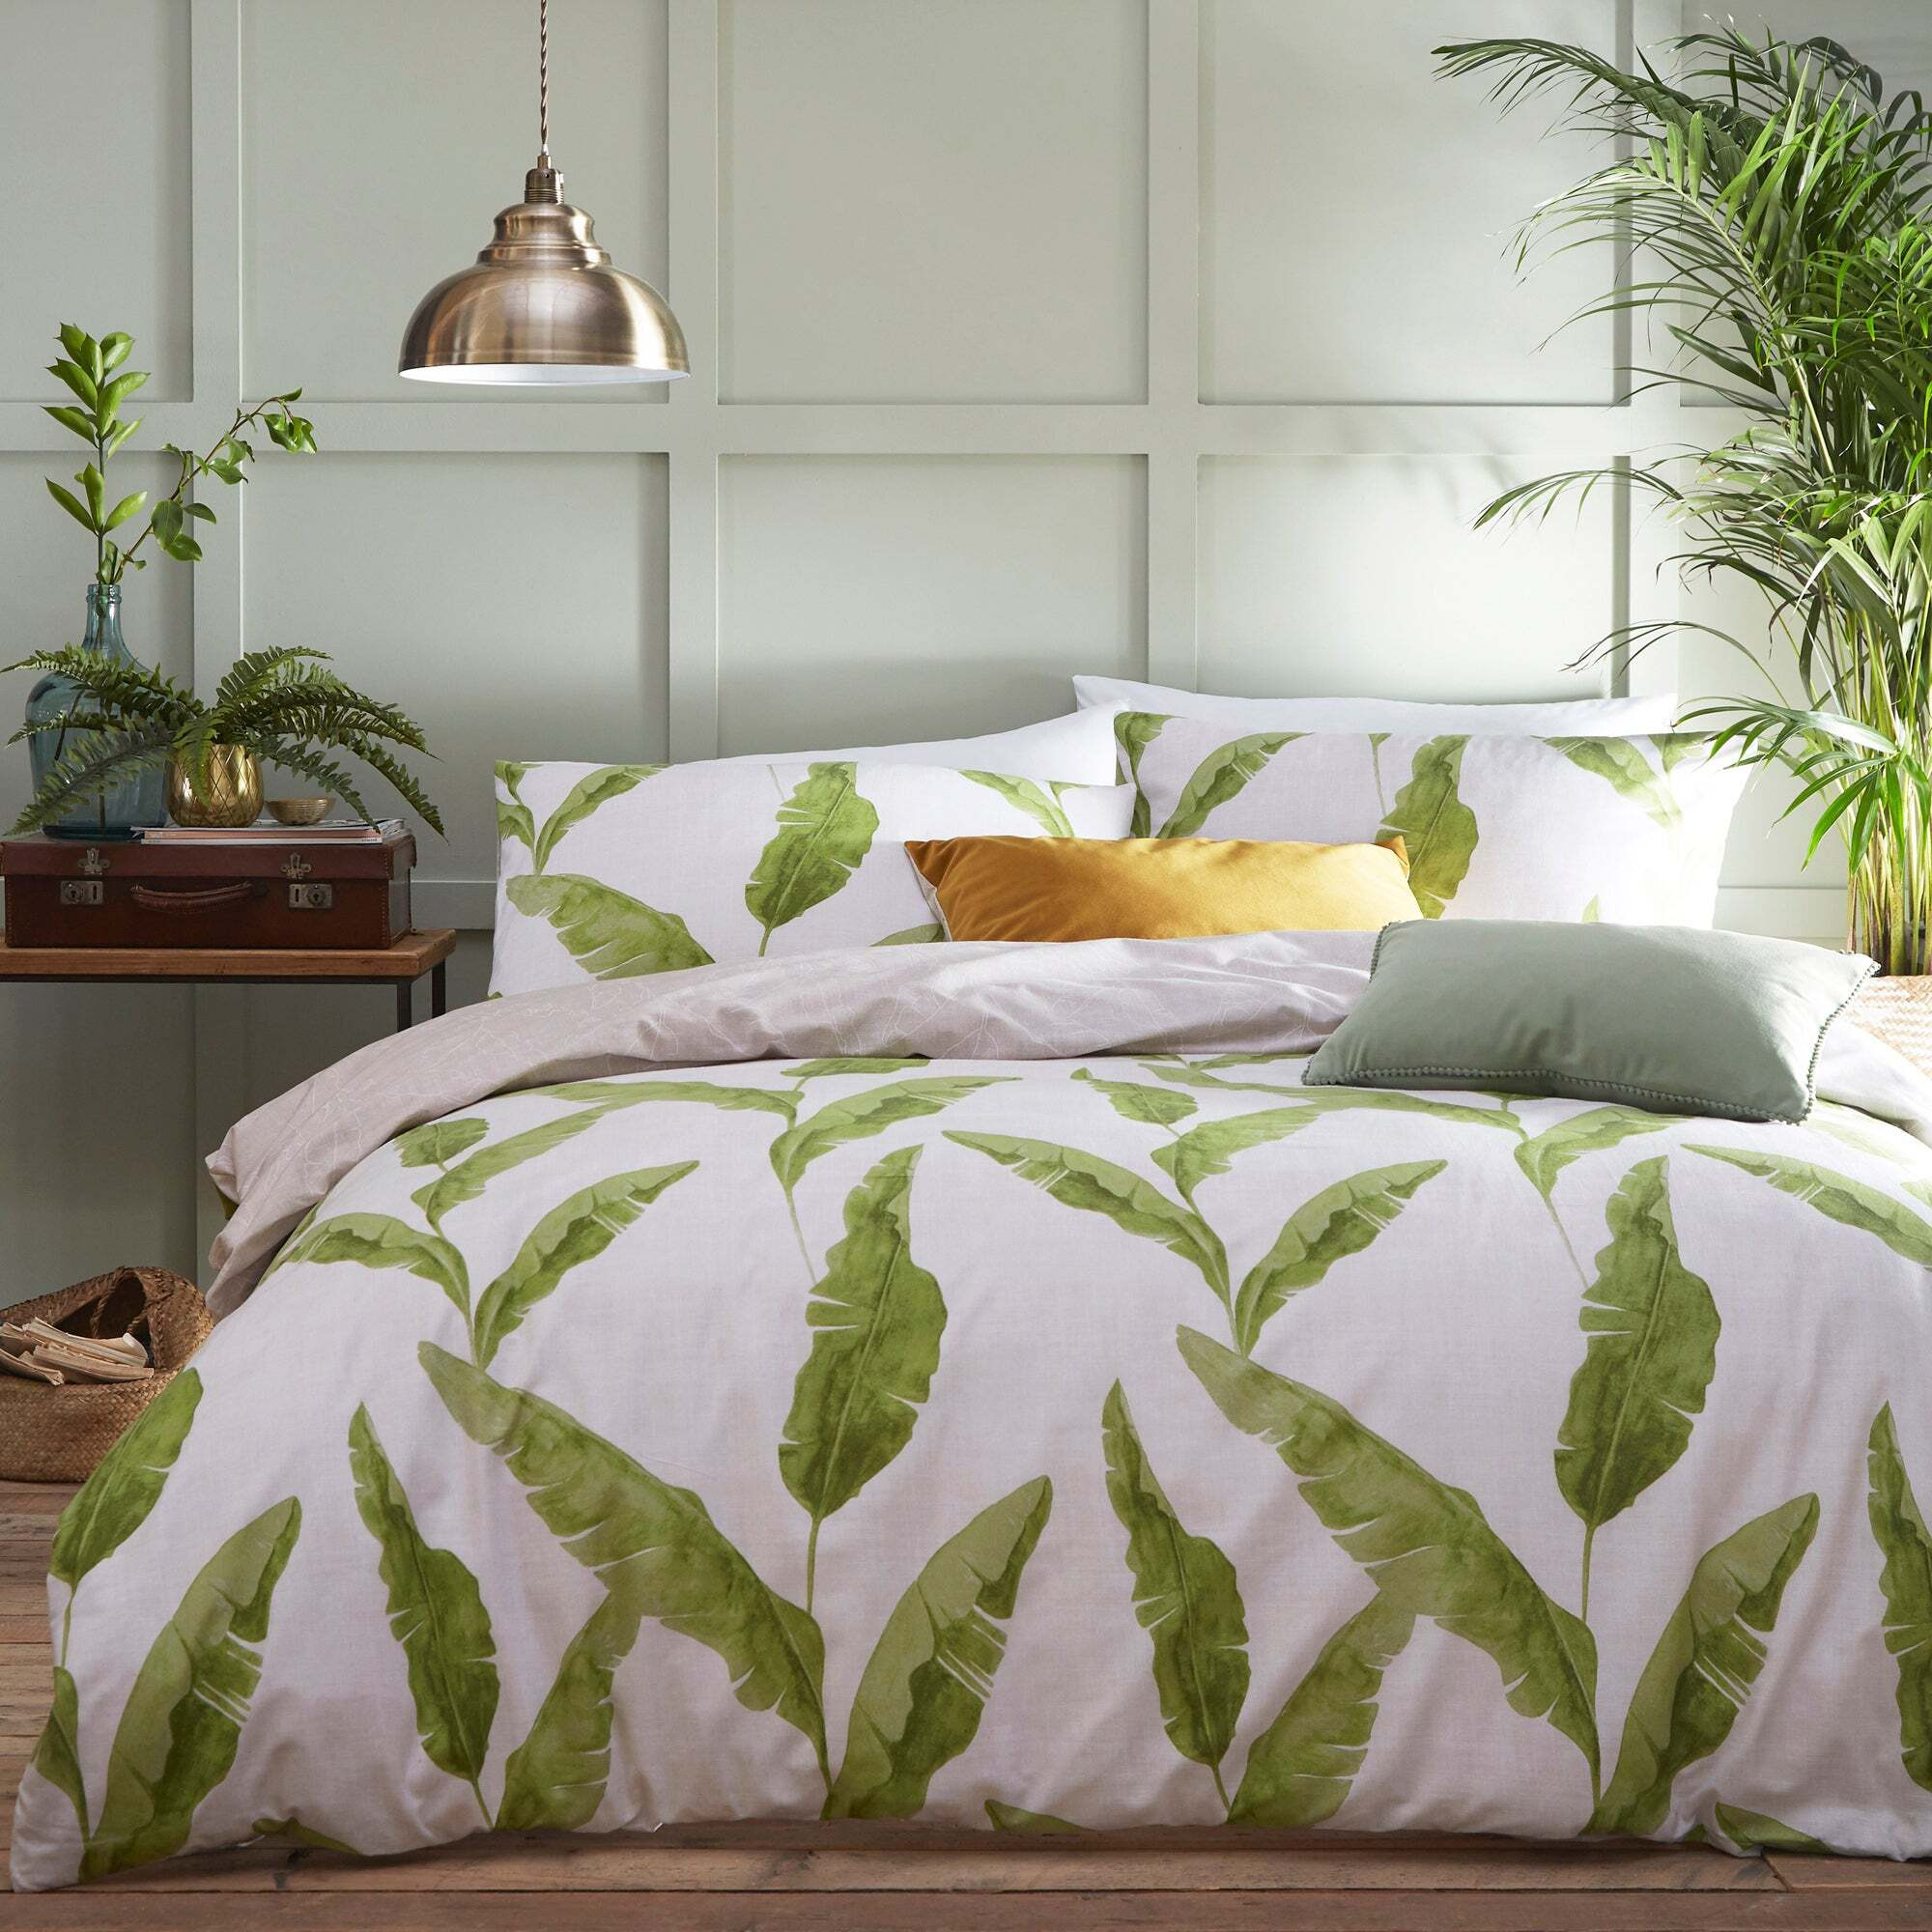 furn. Plantain Leaf Green Reversible Duvet Cover and Pillowcase Set White and Green